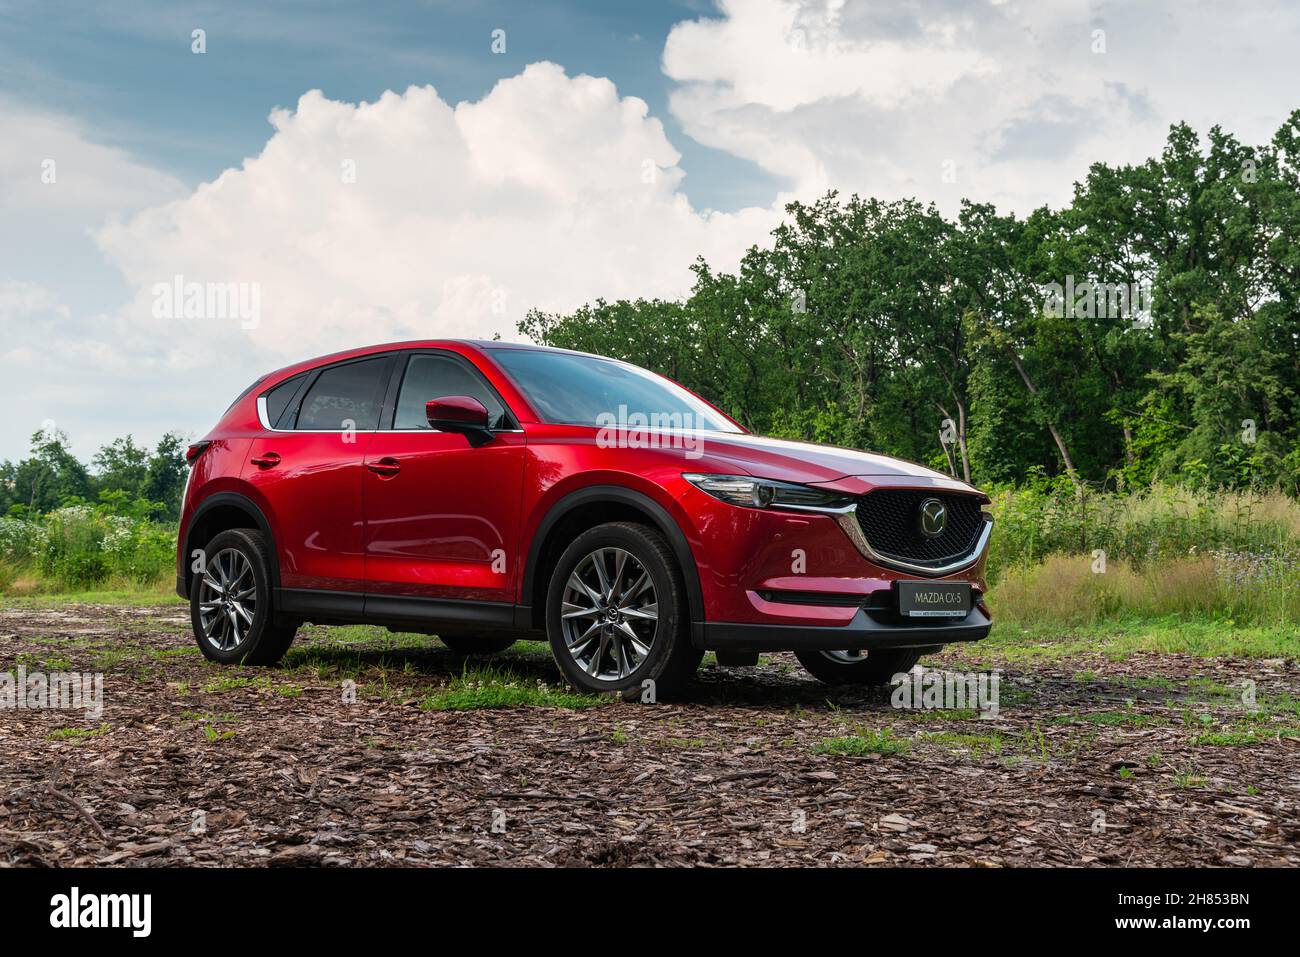 Ukraine - July 4, 2021: New red Mazda CX-5 on forest road Stock Photo